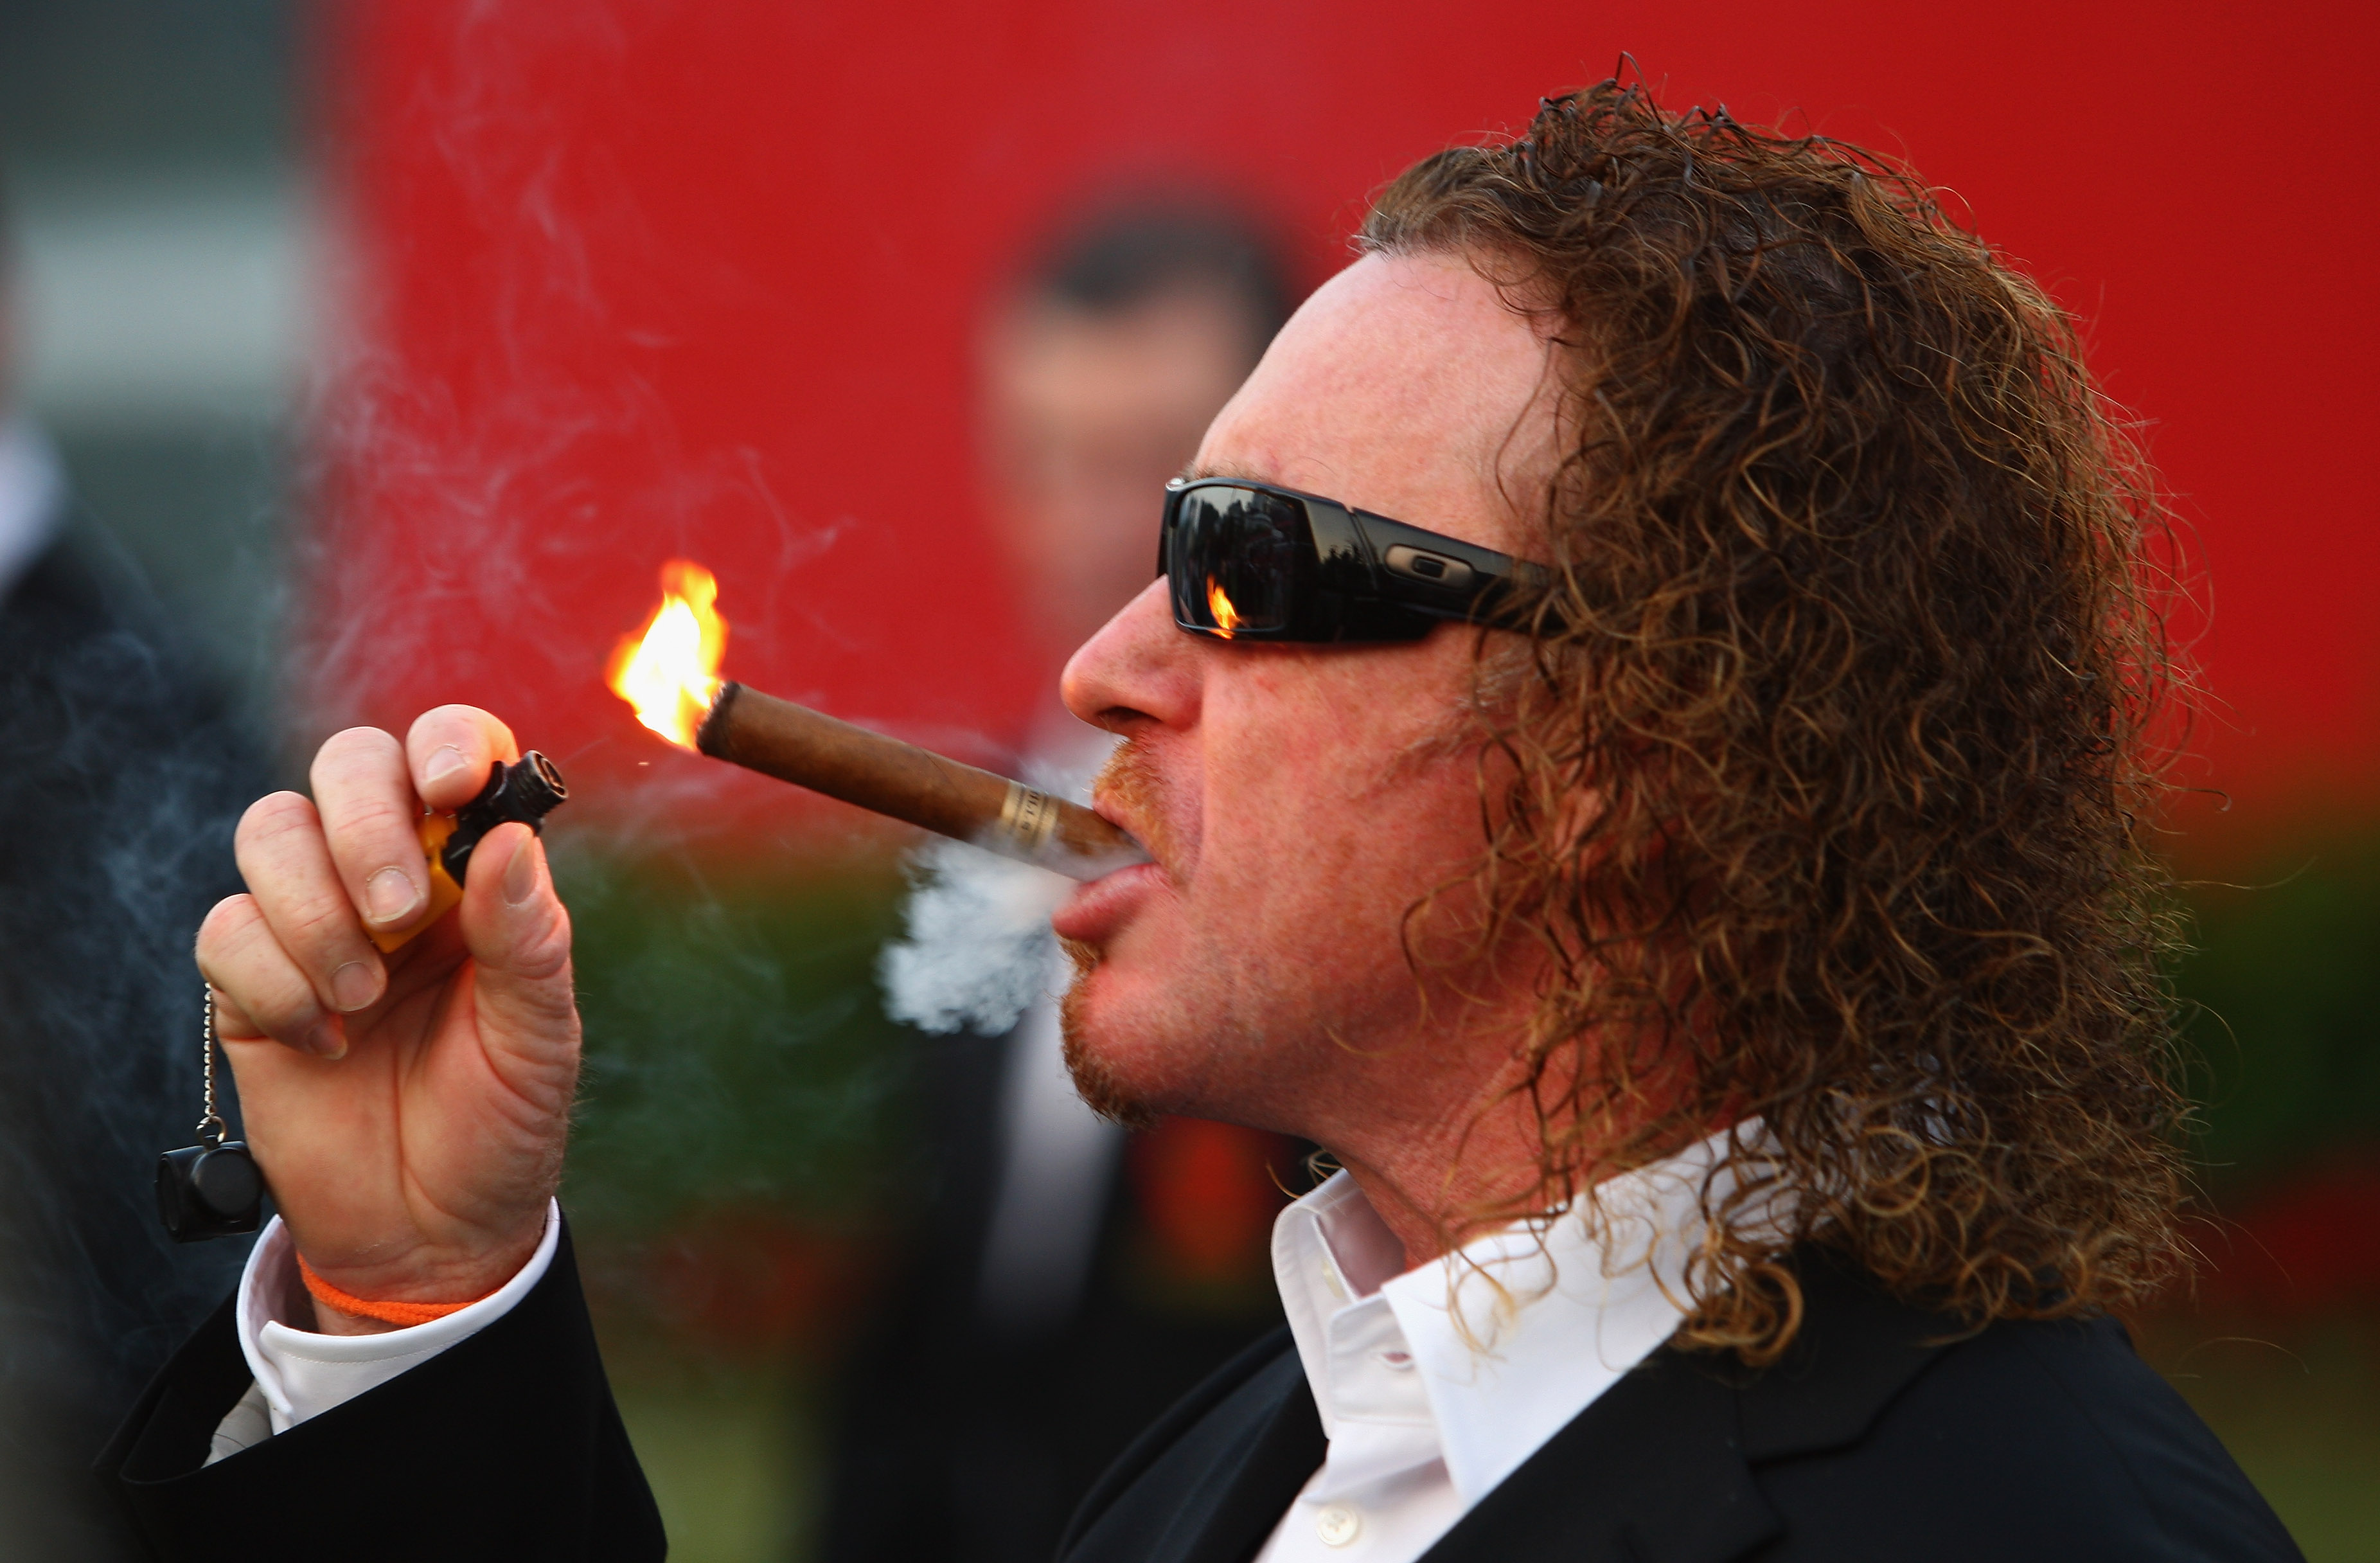 Jimenez is known for his penchant for cigars (Photo: Getty Images)